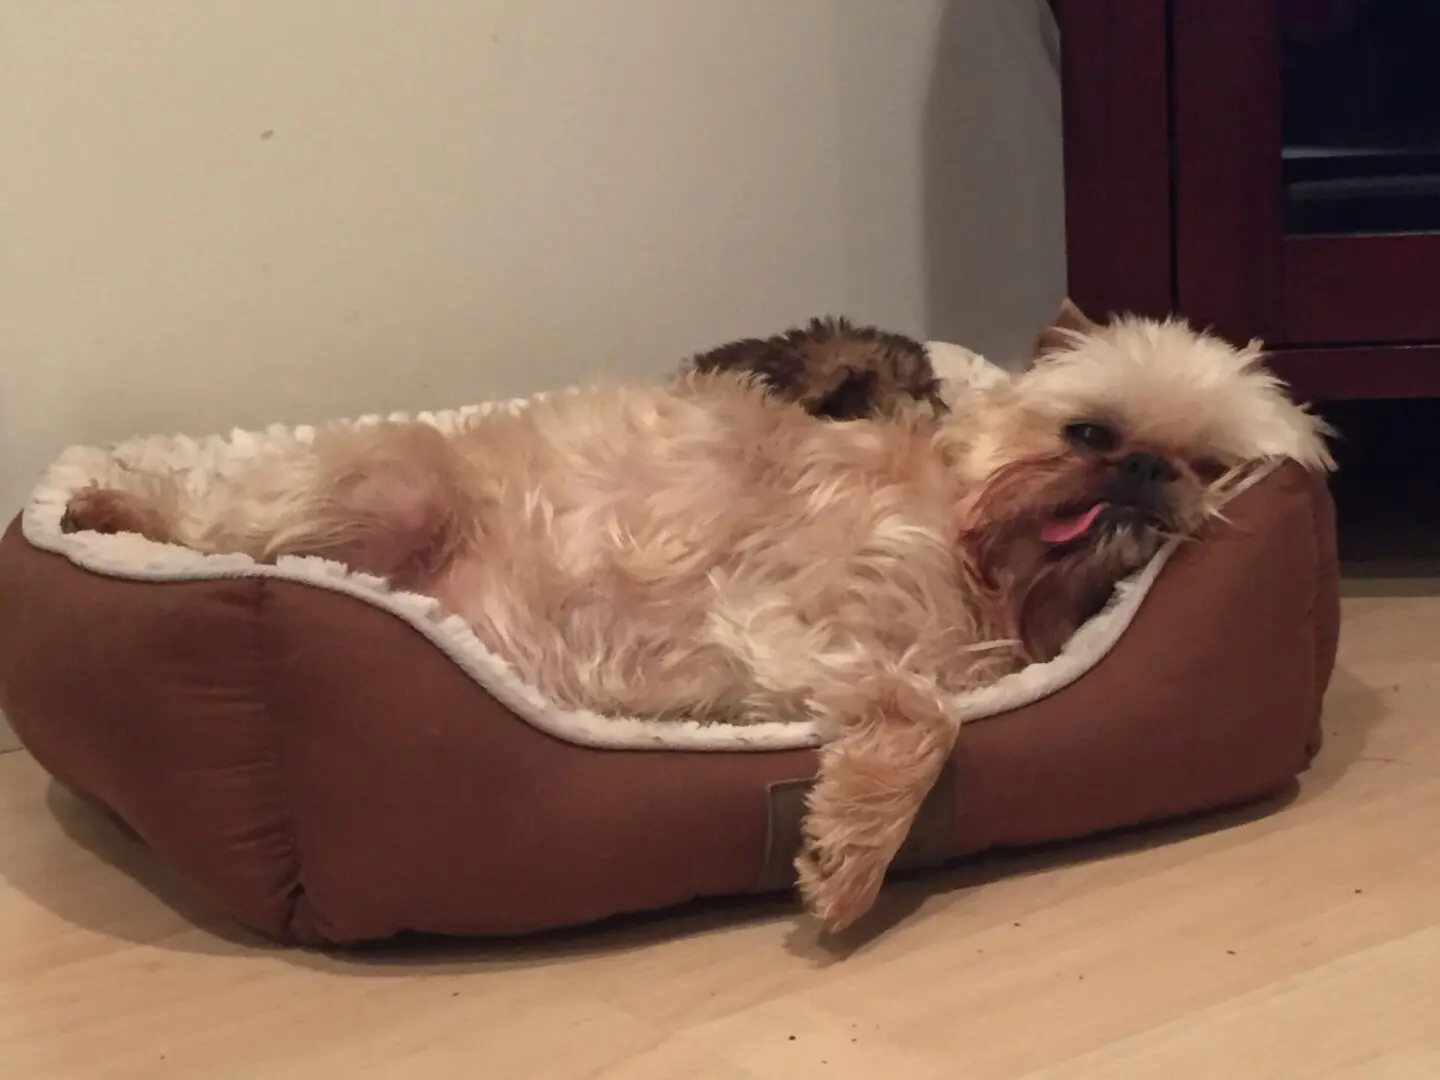 A Brussels Griffon sleeping on a dog bed with its tongue out